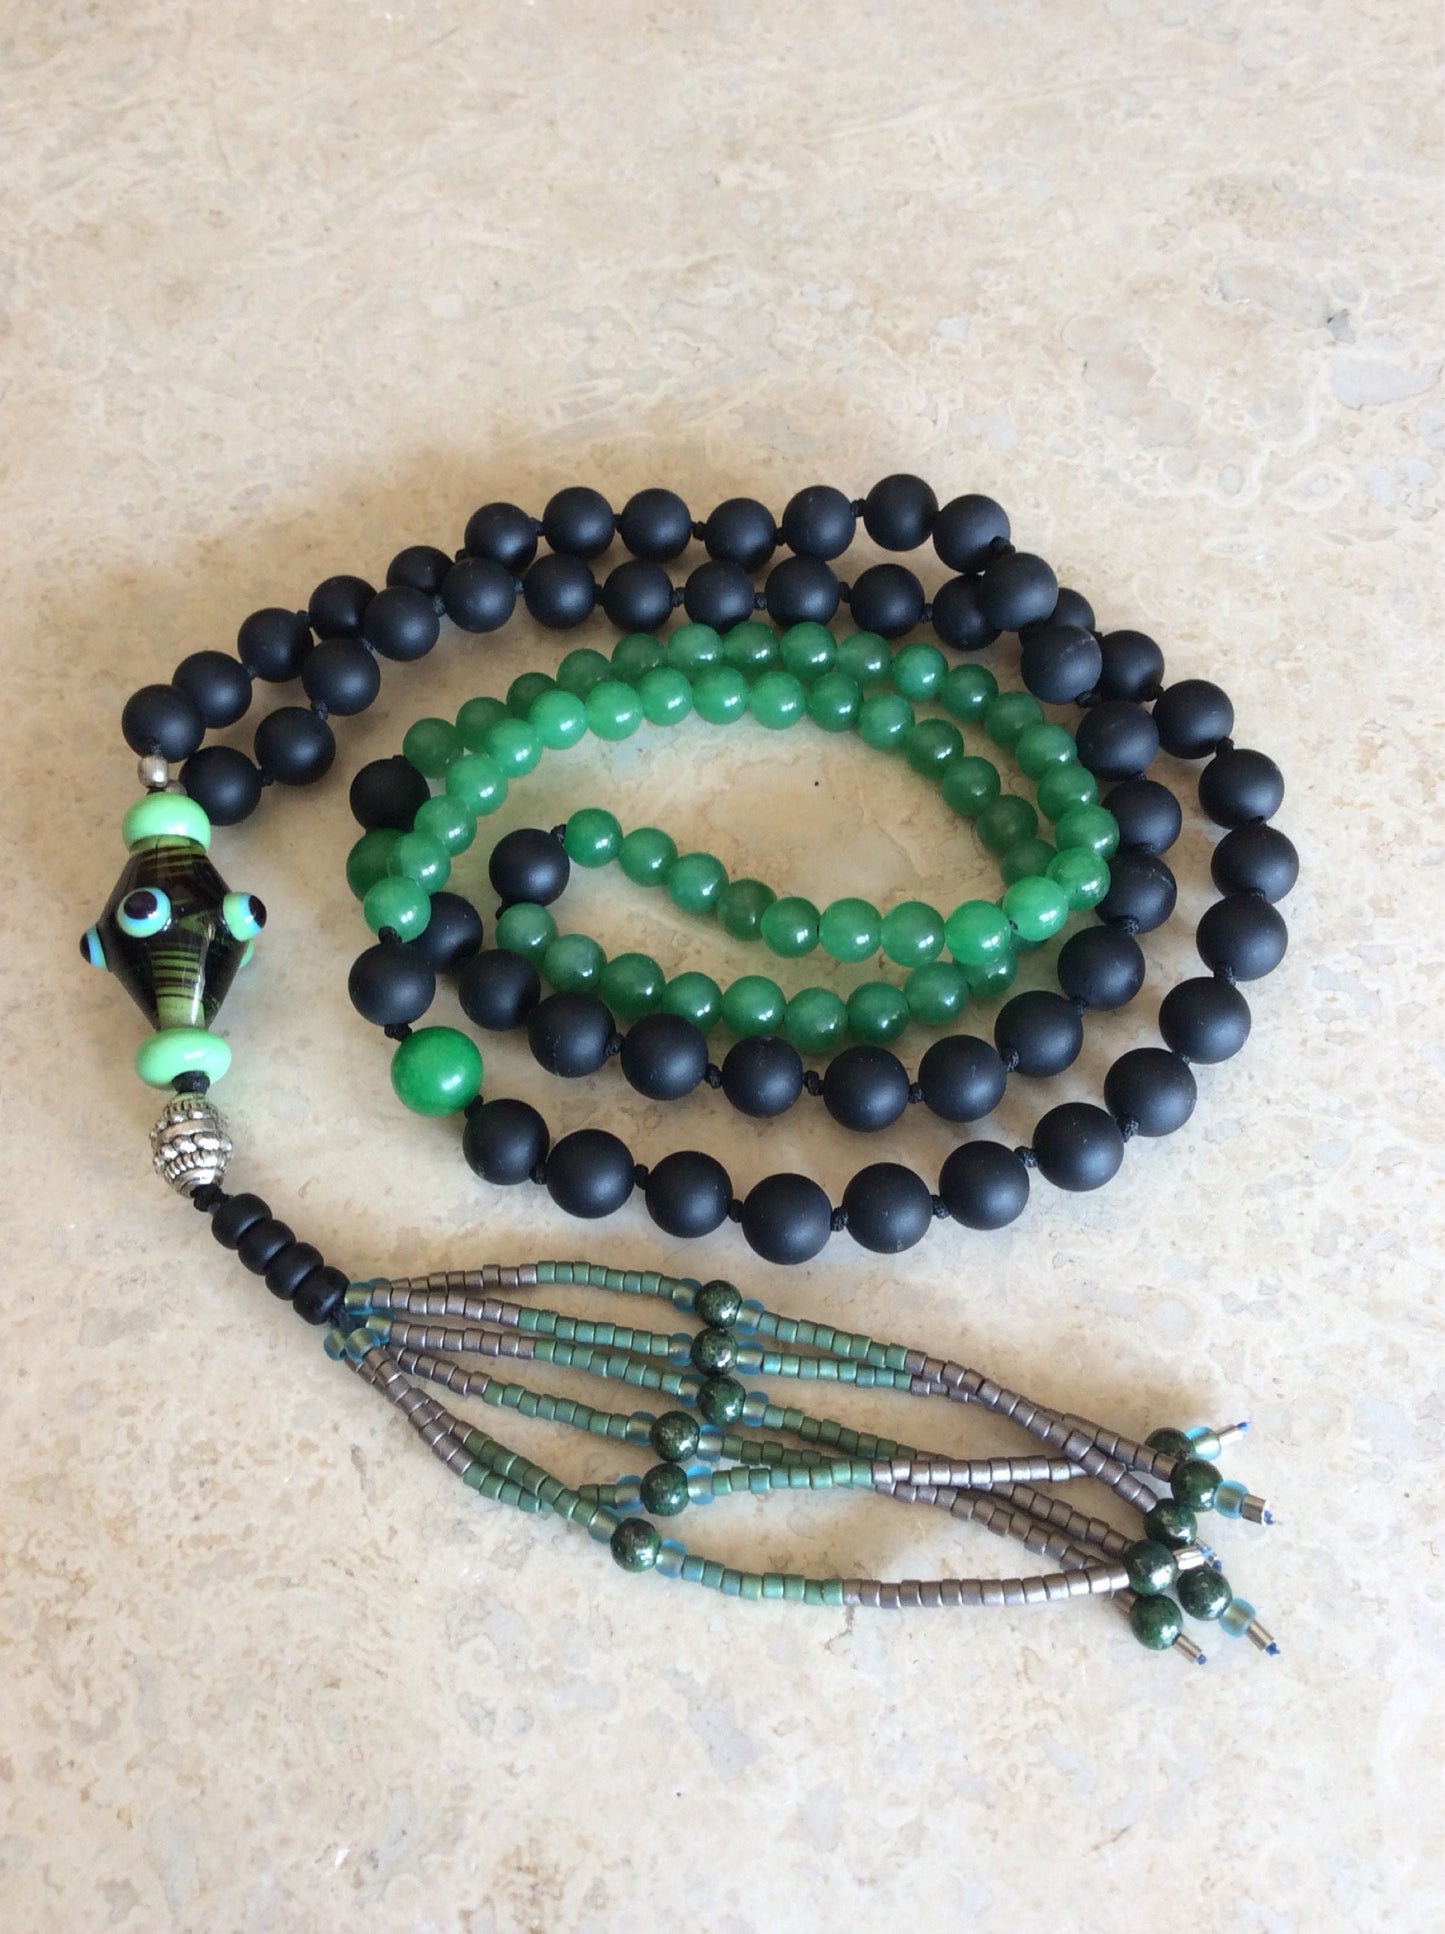 Japa mala bead necklace - gemstone prayer beads with beaded tassel - statement necklace for yoga lover - green and black mala necklace